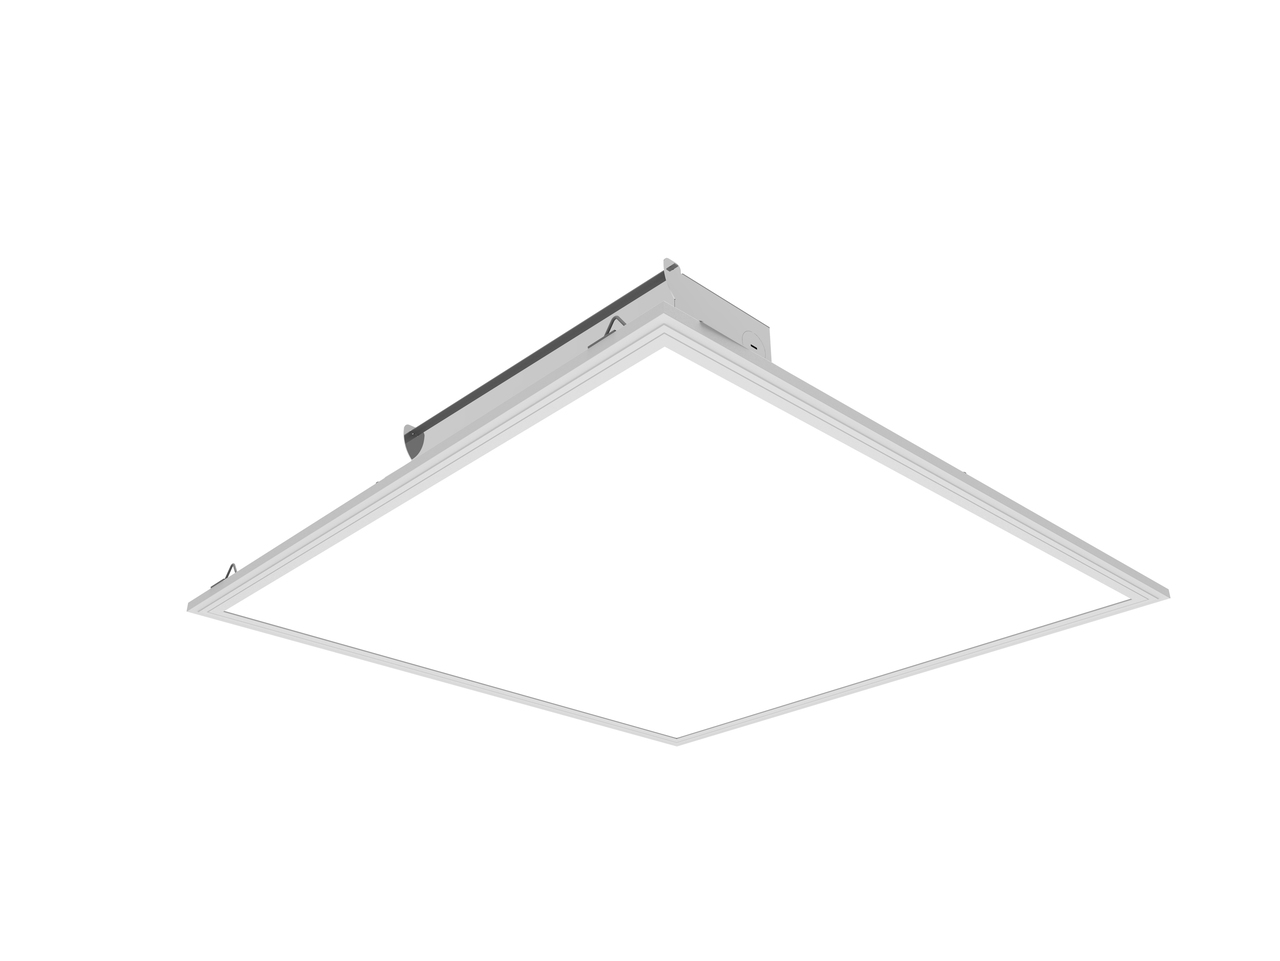 LED Flat Panel 2X2 - 3500K Neutral White - Dimmable - For Standard Drop Ceilings